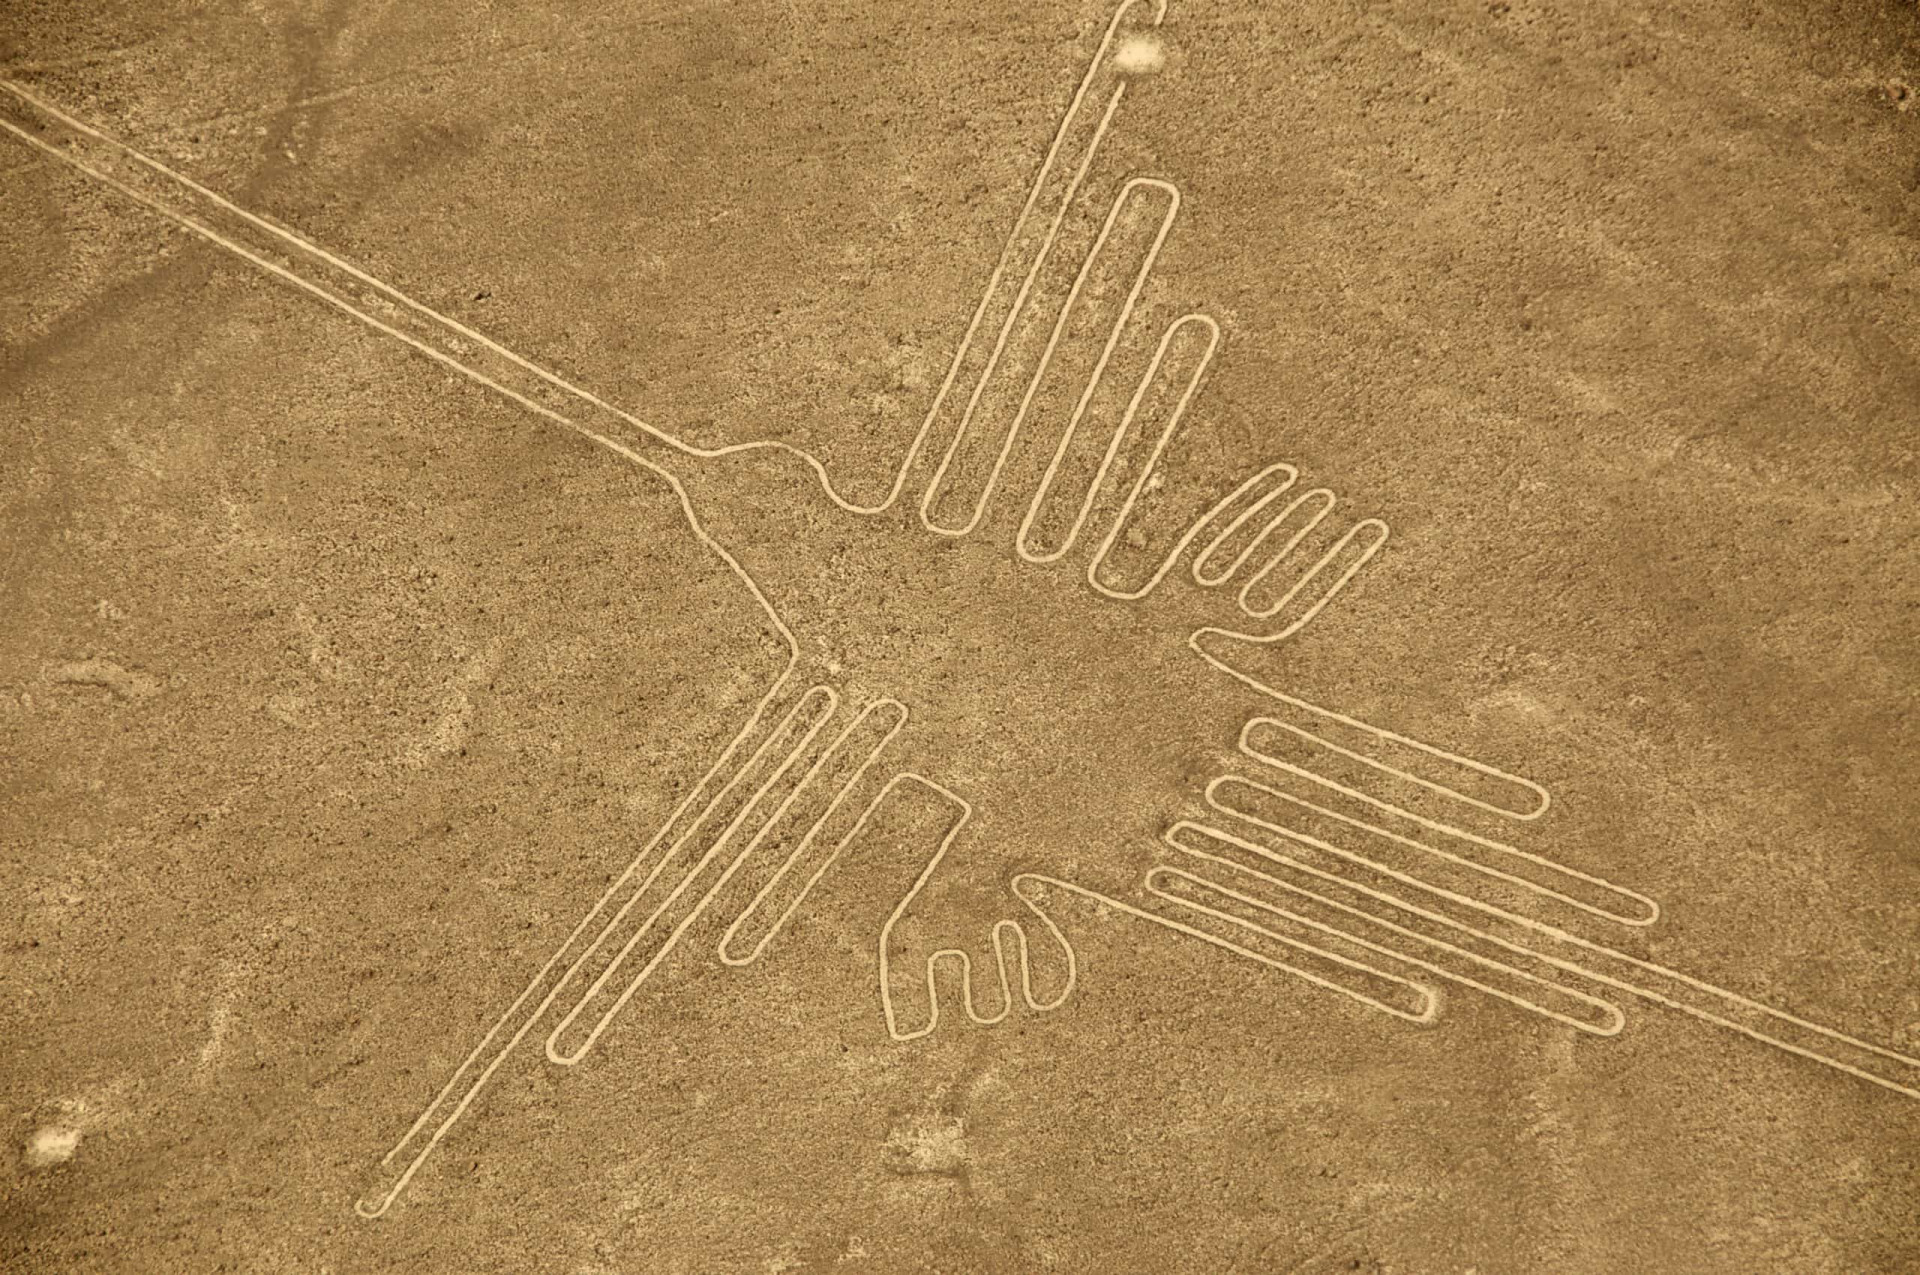 Location: Nazca<br>Criteria: Cultural<br>Year established: 1994<br>Description: Created between 400 and 650 CE and believed by archaeologists to have served a ritualistic purpose, the huge and impressive designs in the Nazca Desert include animals such as a monkey and a hummingbird (pictured).<p><a href="https://www.msn.com/en-us/community/channel/vid-7xx8mnucu55yw63we9va2gwr7uihbxwc68fxqp25x6tg4ftibpra?cvid=94631541bc0f4f89bfd59158d696ad7e">Follow us and access great exclusive content every day</a></p>